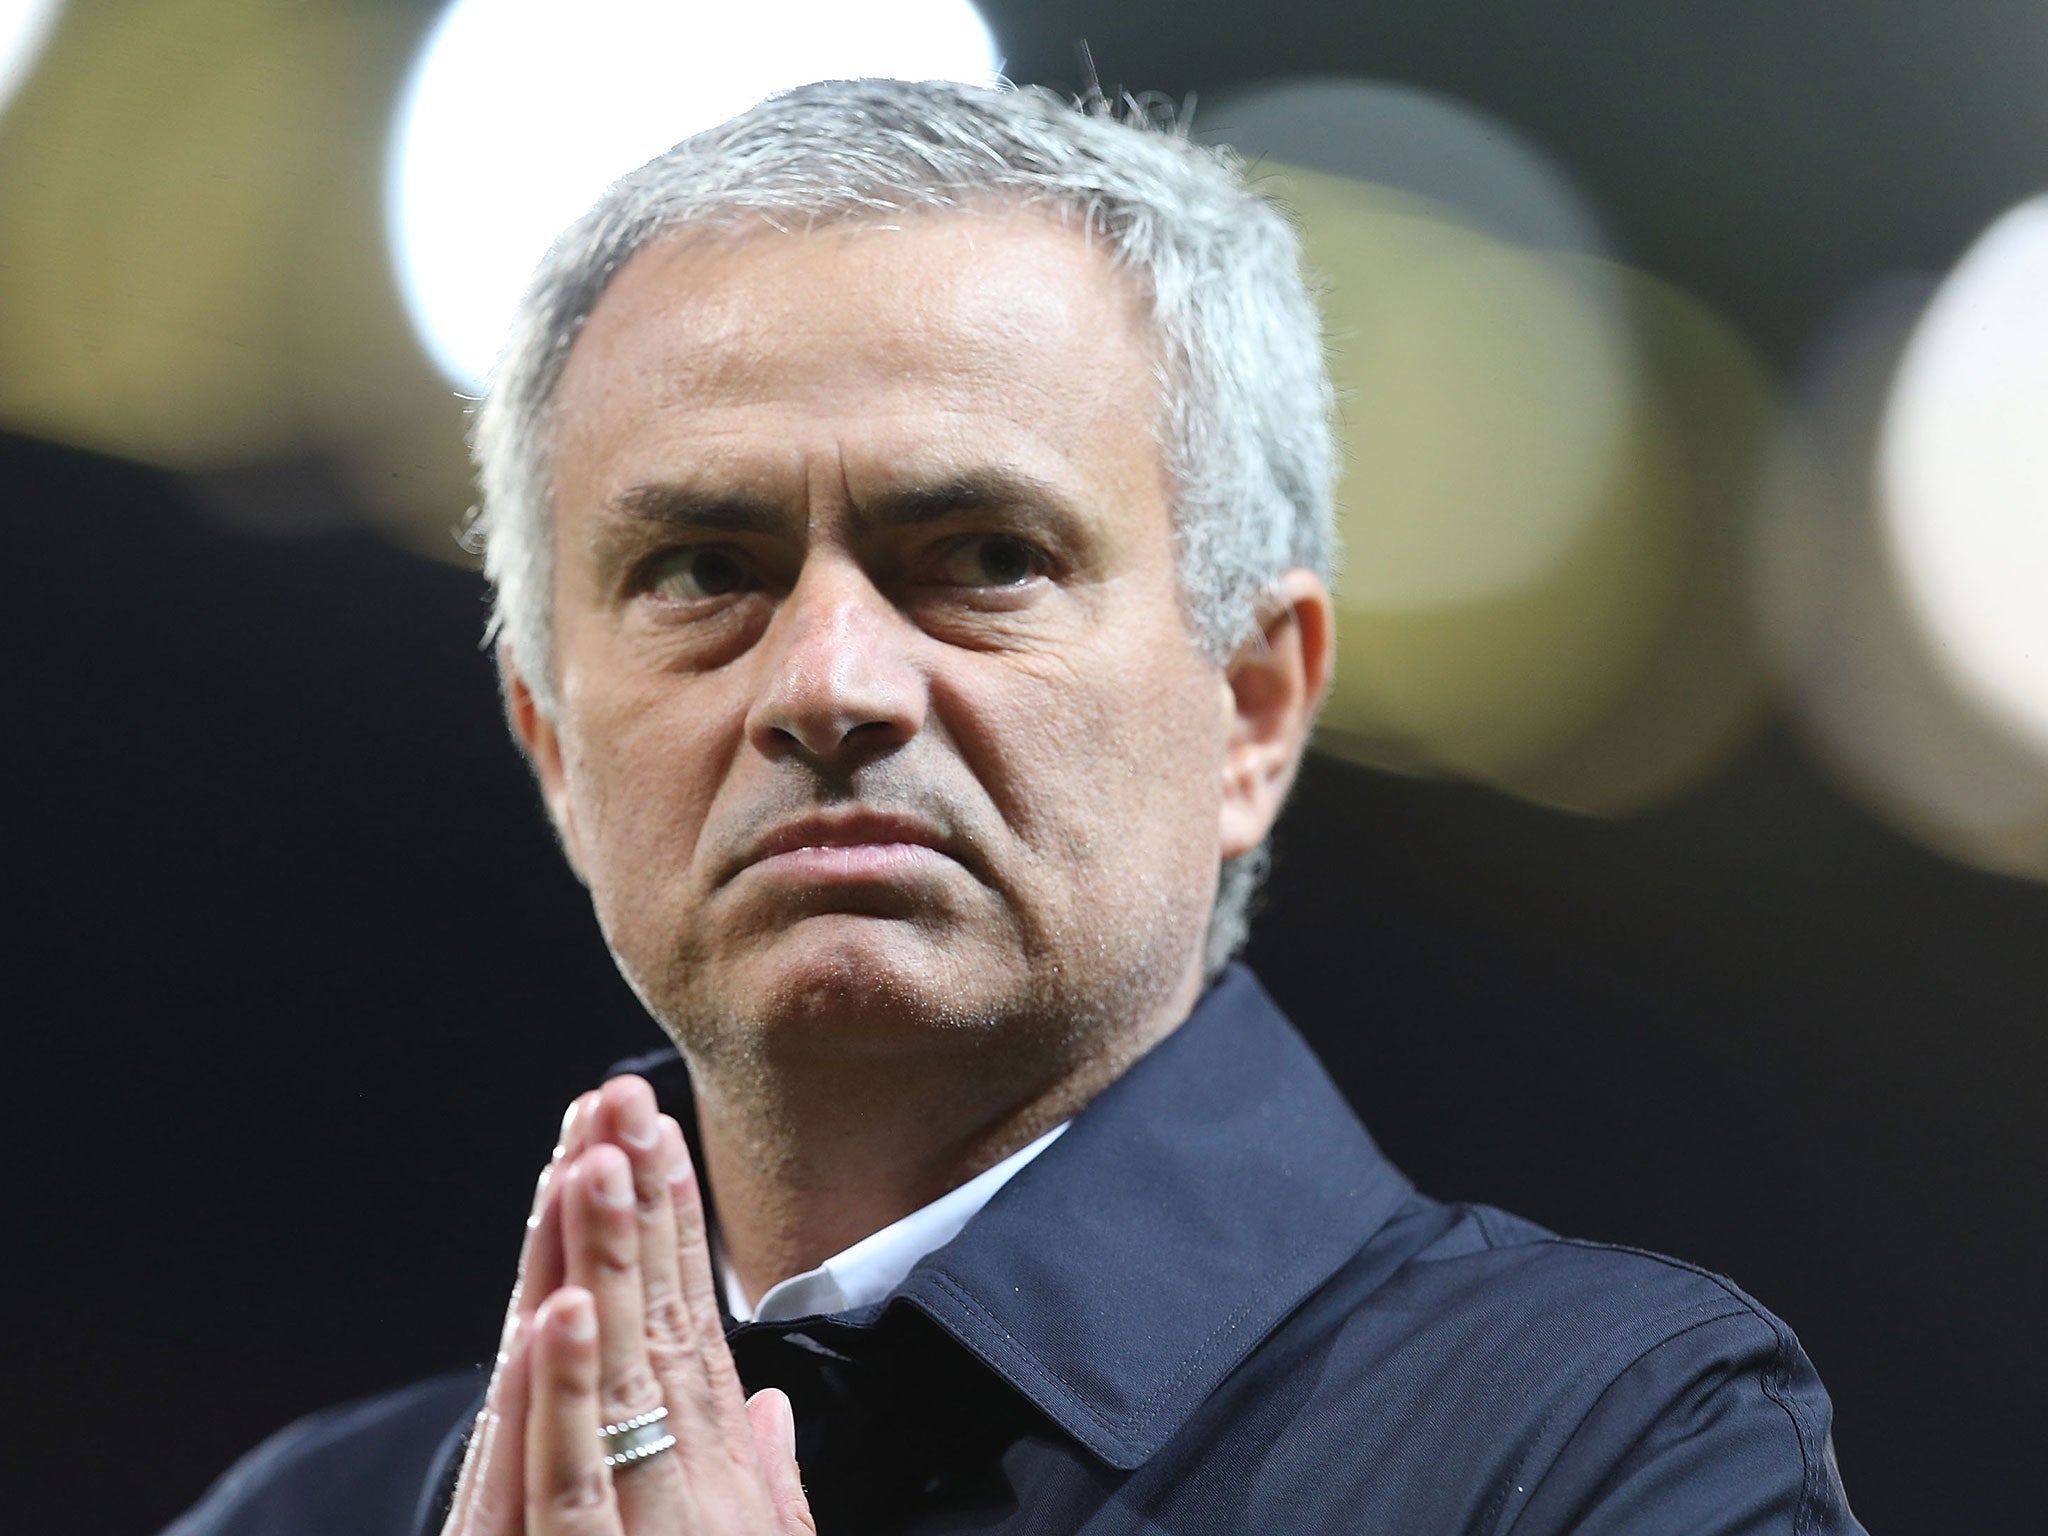 Mourinho pleaded for forgiveness after Wednesday's game at Old Trafford